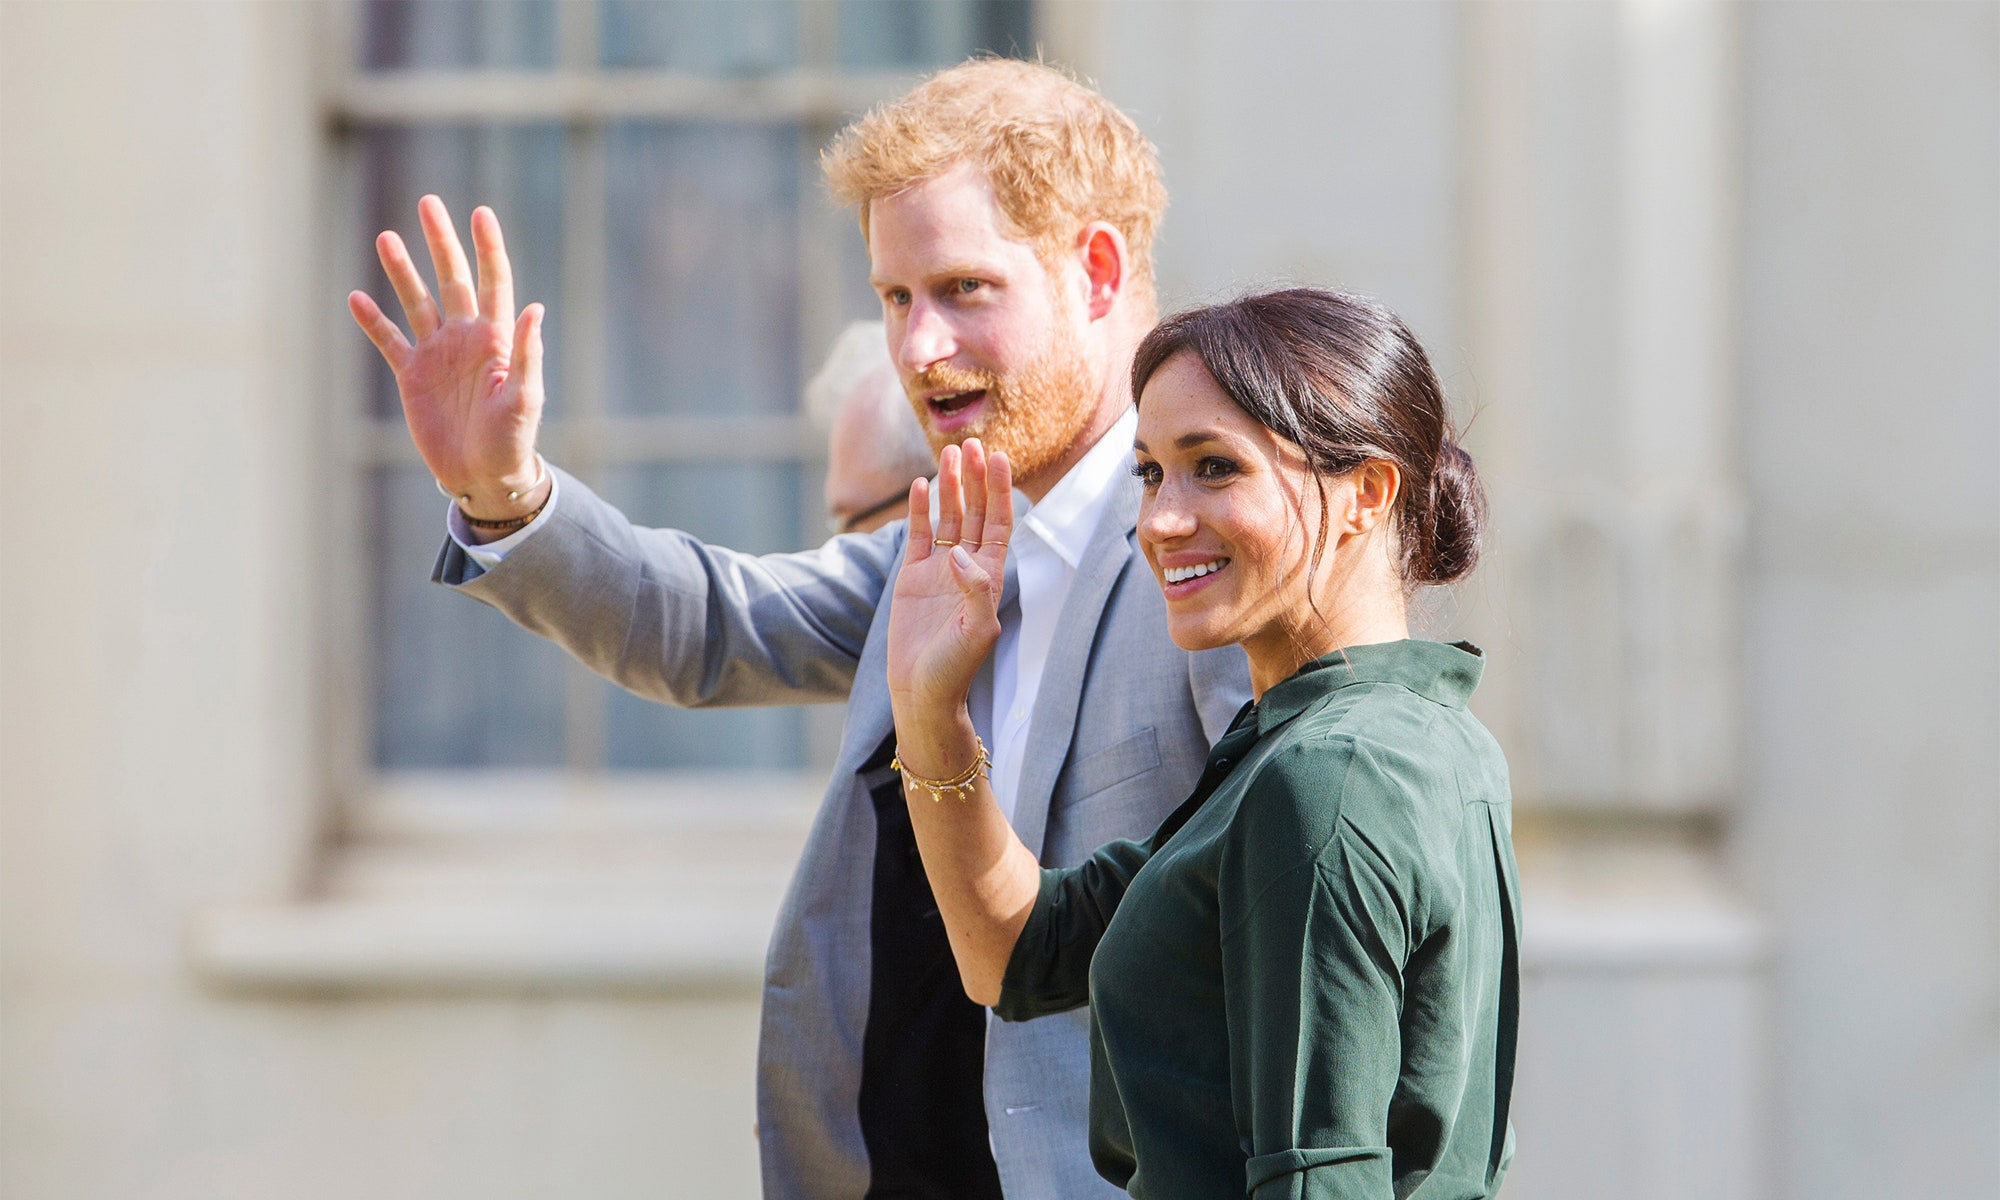 Even after the birth of Lilibet Diana, the second child of Meghan Markle and Prince Harry, it appears that the royal family is upset. Hold a grudge, much?